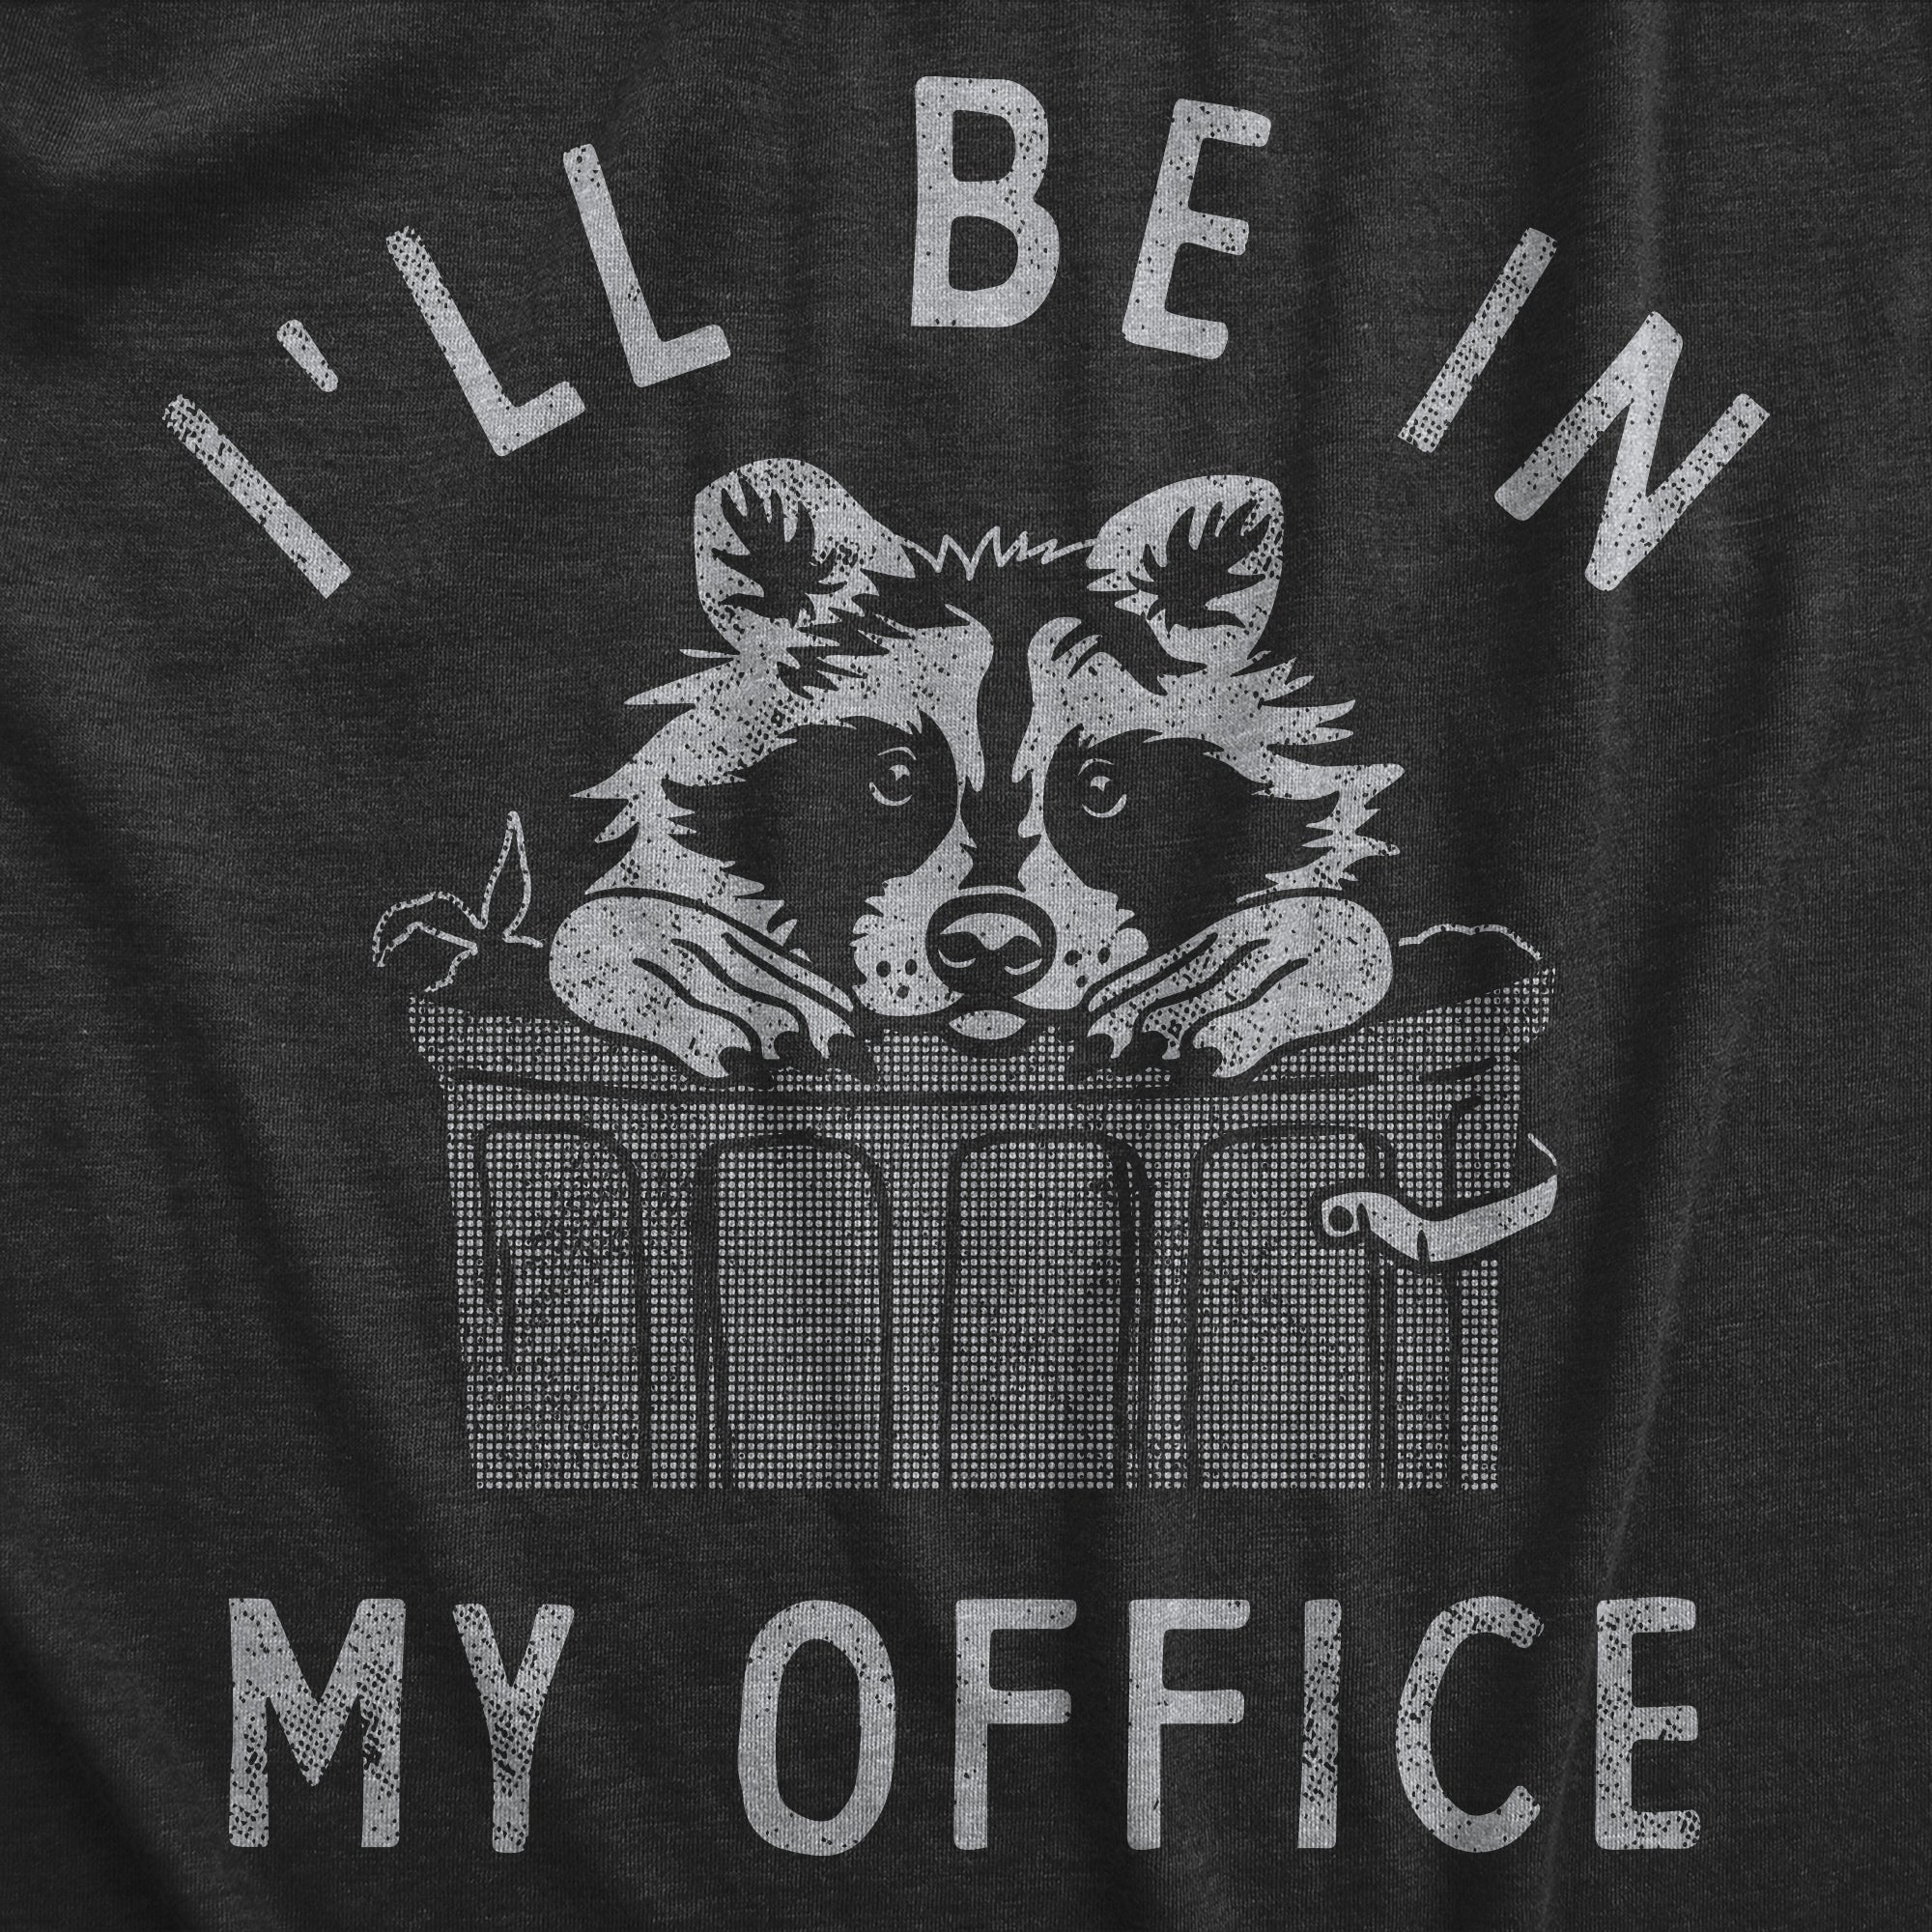 Funny Heather Black - OFFICE Ill Be In My Office Raccoon Womens T Shirt Nerdy animal Sarcastic Tee